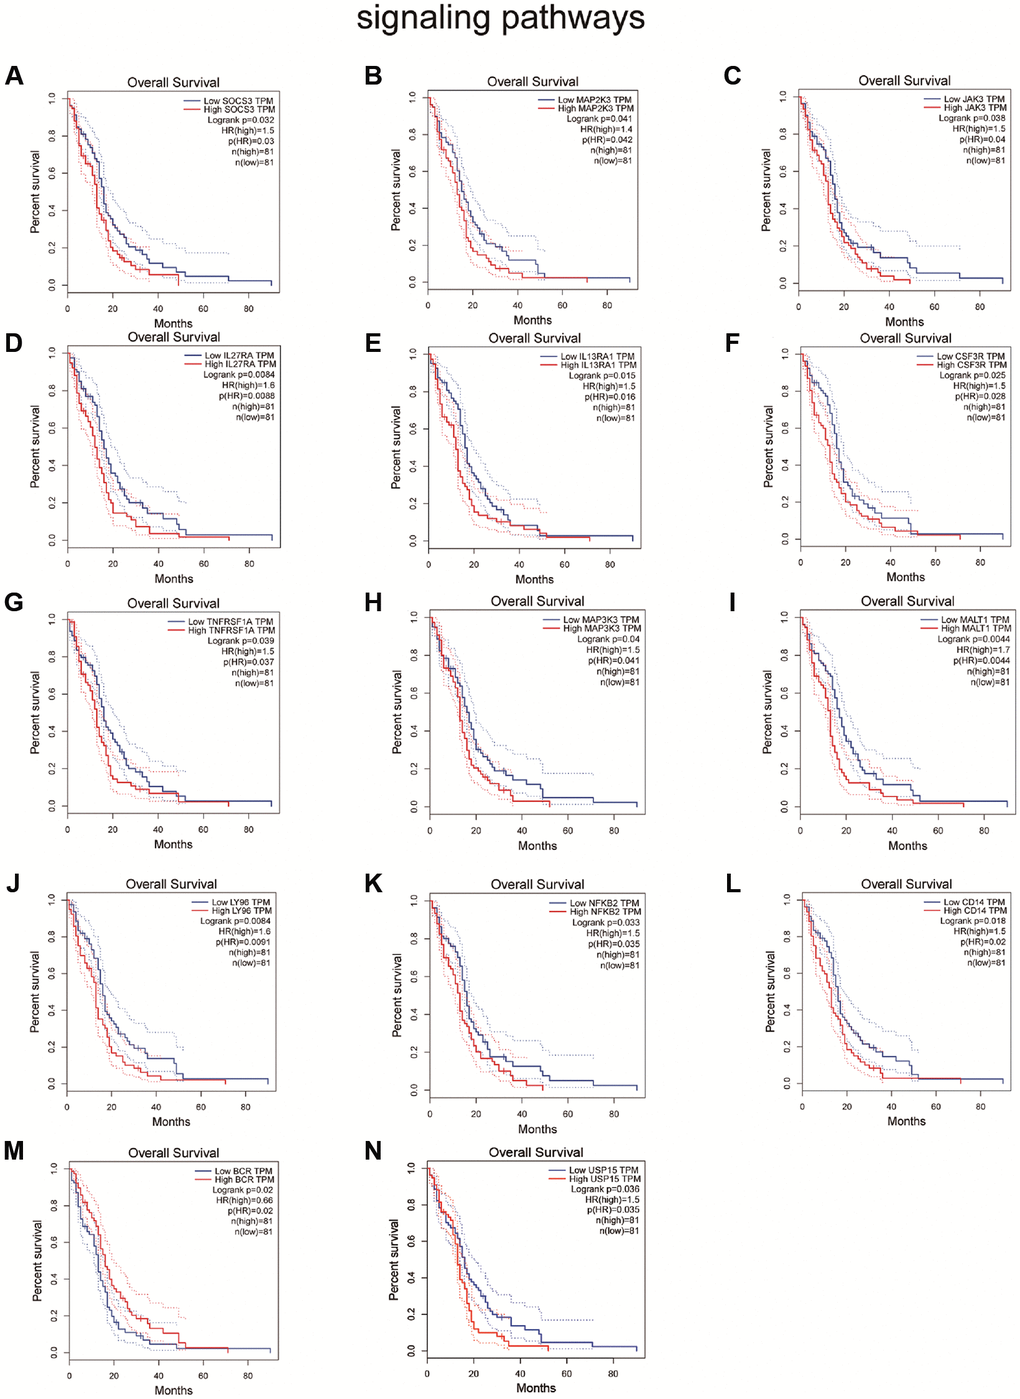 Survival analysis shown the effect of genes related to IKBIP in the (A–F) JAK/STAT signaling pathway, (G–M) NF-κB signaling pathway and (N) TGFβ/SMAD signaling pathway to glioma patients.